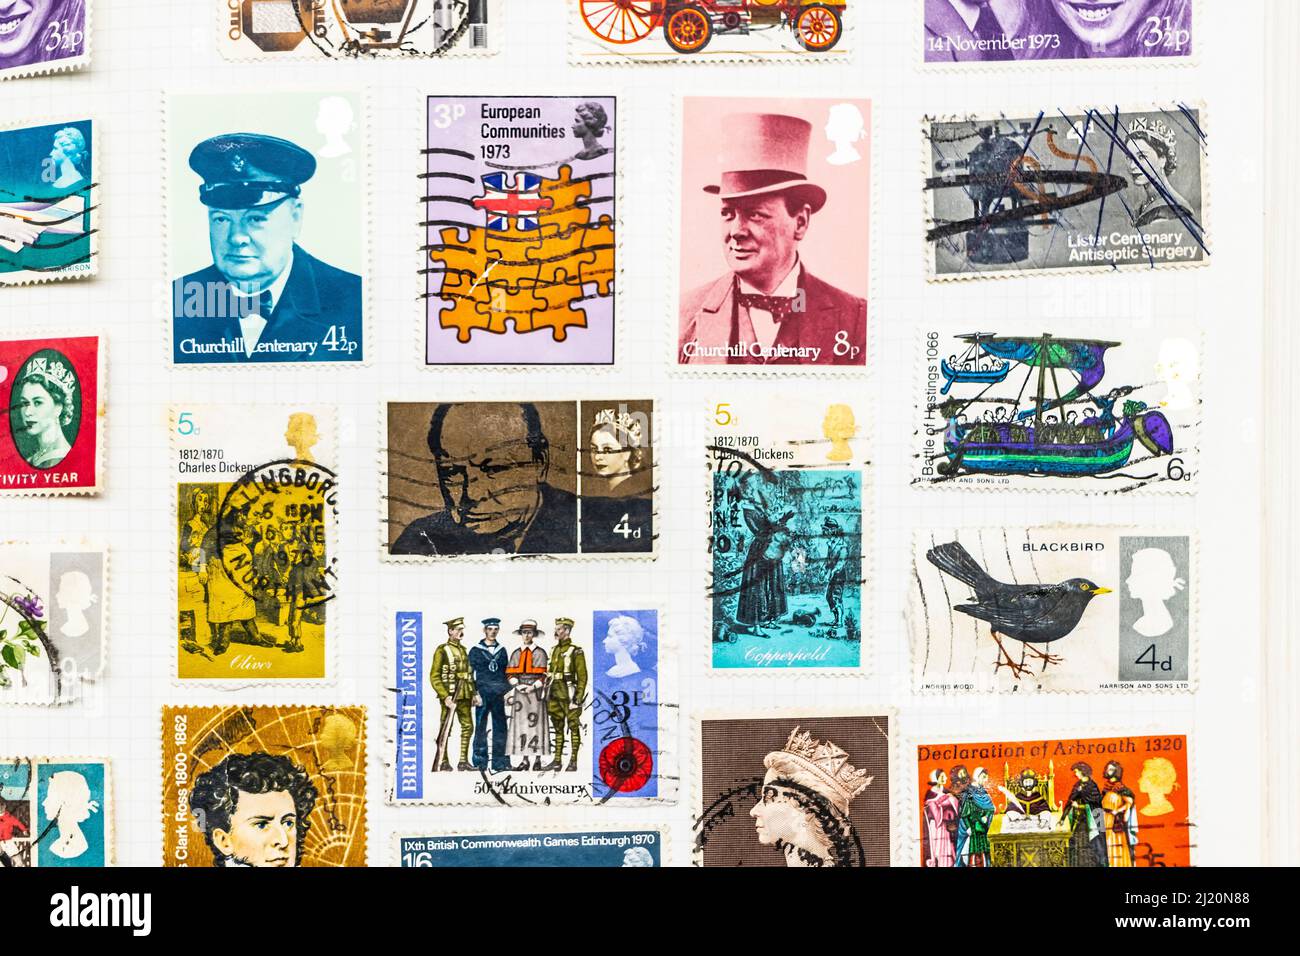 vintage British stamps in a stamp album collection featuring Winston Churchill and the European economic community  or EEC Stock Photo